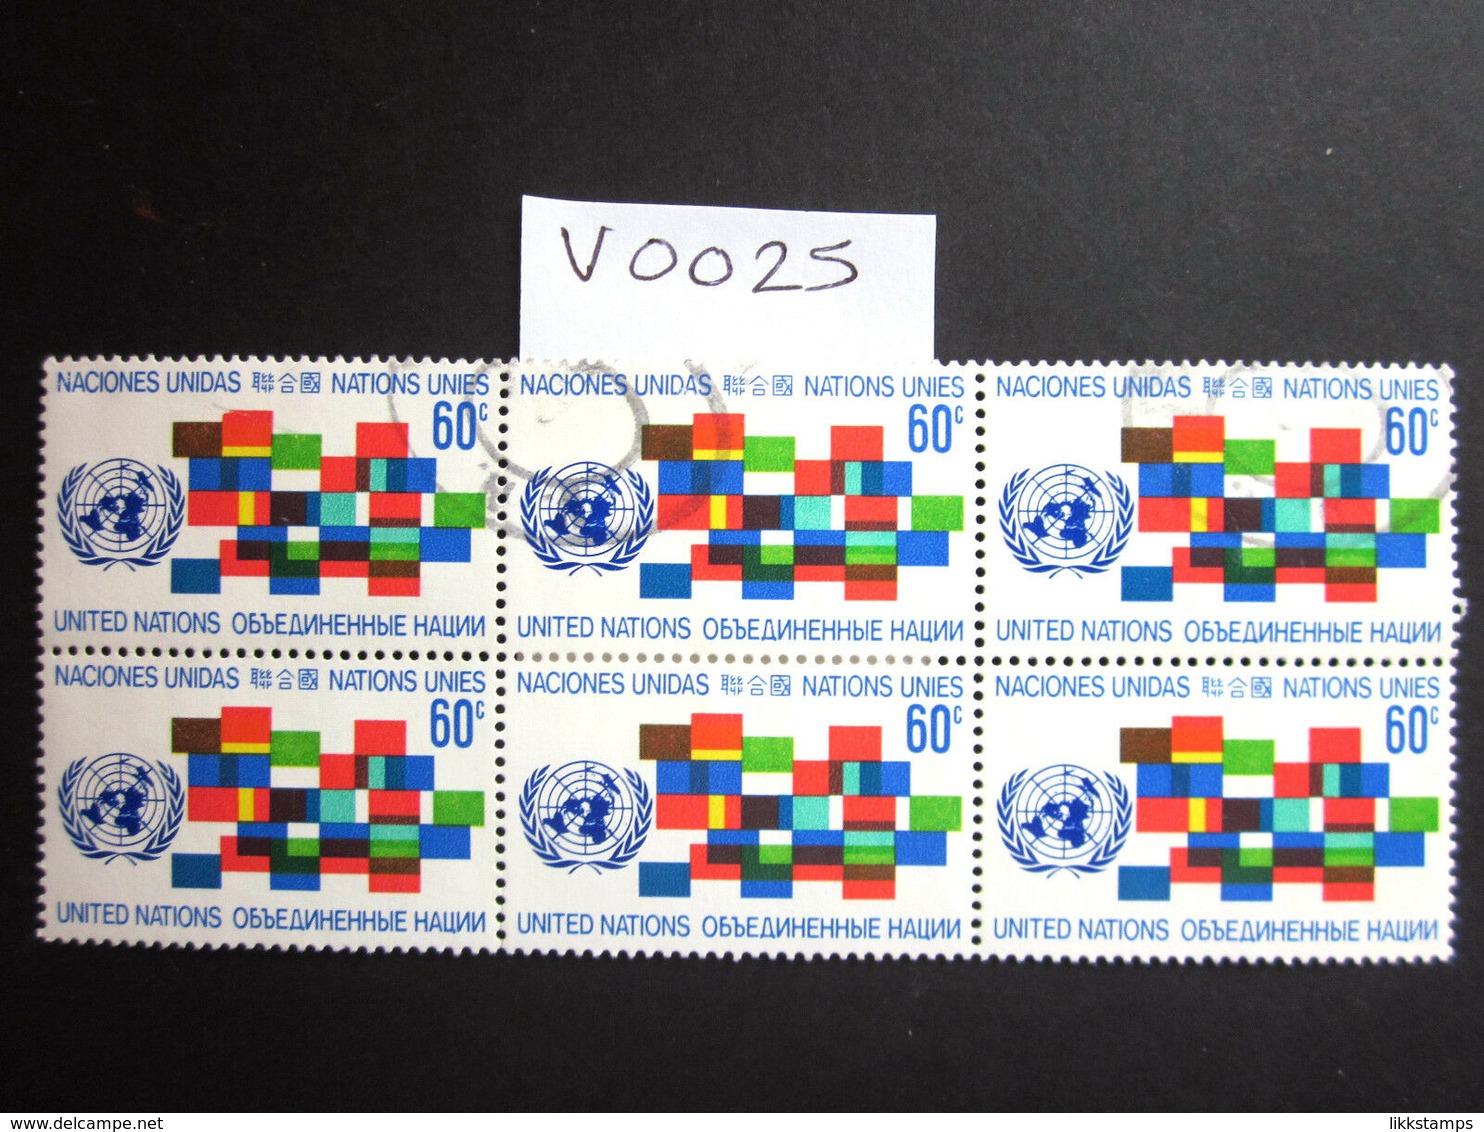 1971 A FINE USED BLOCK OF 6 "SG 223" PICTORIAL UNITED NATIONS USED STAMPS ( V0025 ) #00353 - Collections, Lots & Séries